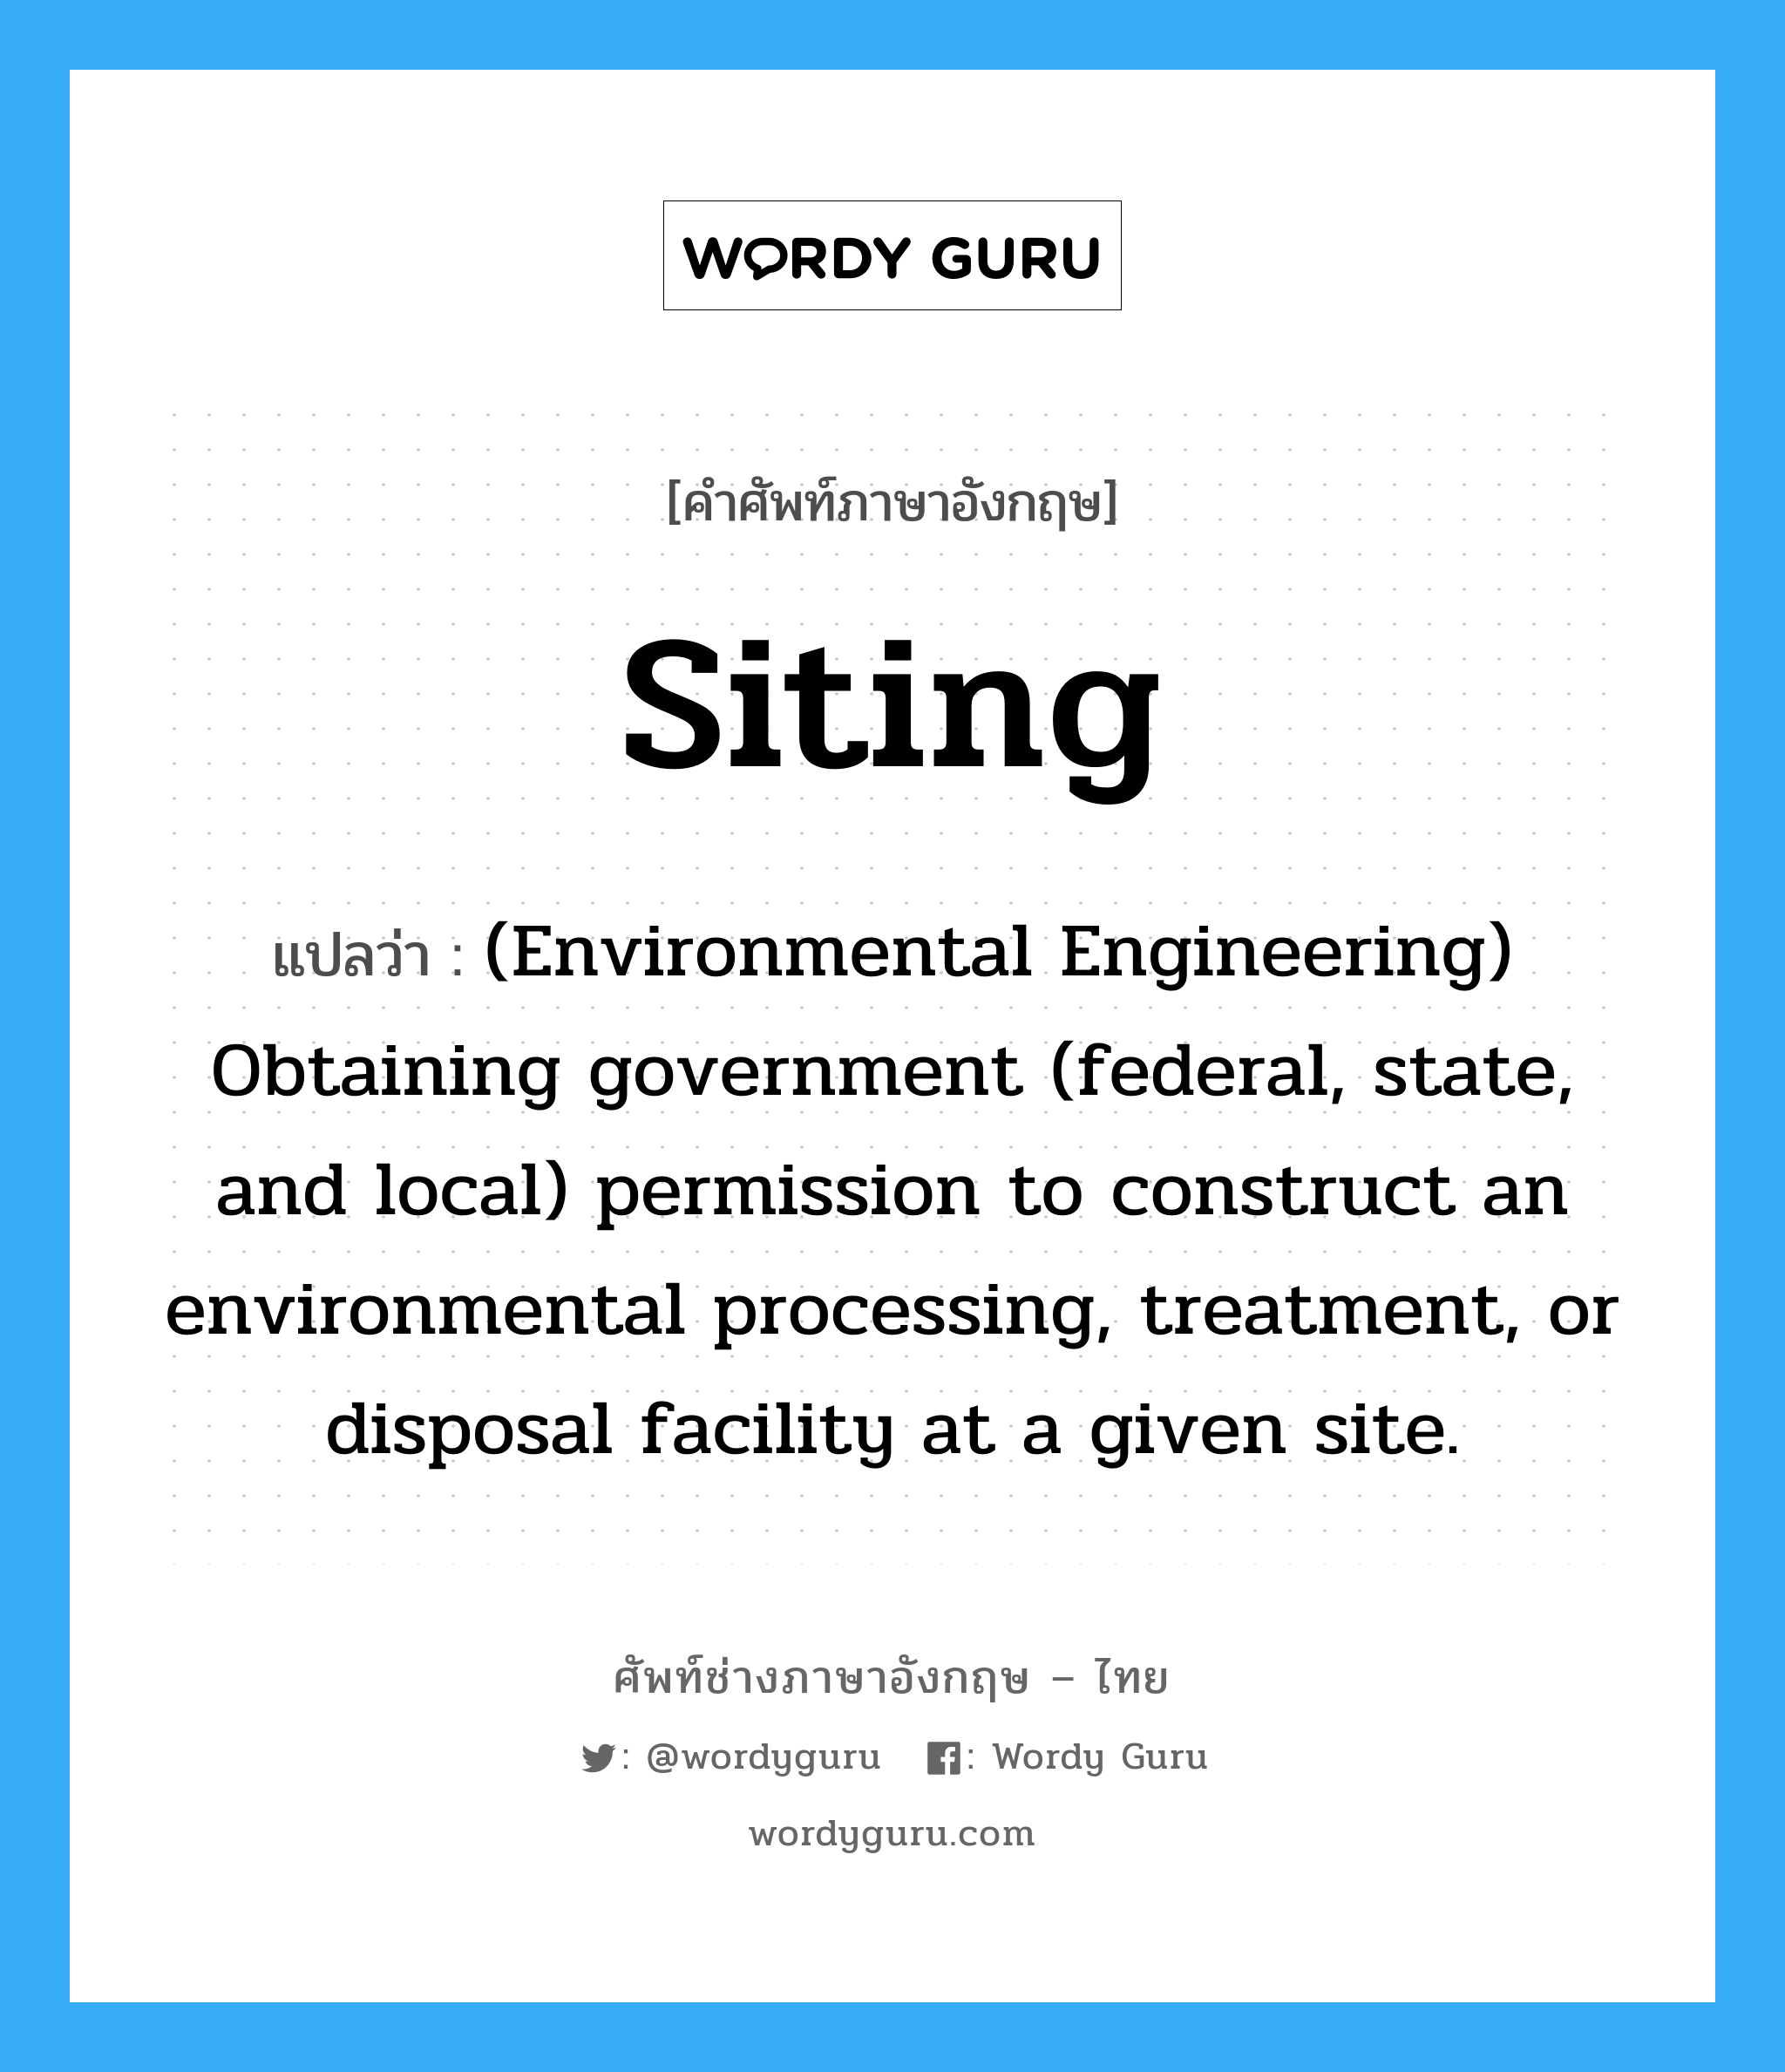 Siting แปลว่า?, คำศัพท์ช่างภาษาอังกฤษ - ไทย Siting คำศัพท์ภาษาอังกฤษ Siting แปลว่า (Environmental Engineering) Obtaining government (federal, state, and local) permission to construct an environmental processing, treatment, or disposal facility at a given site.